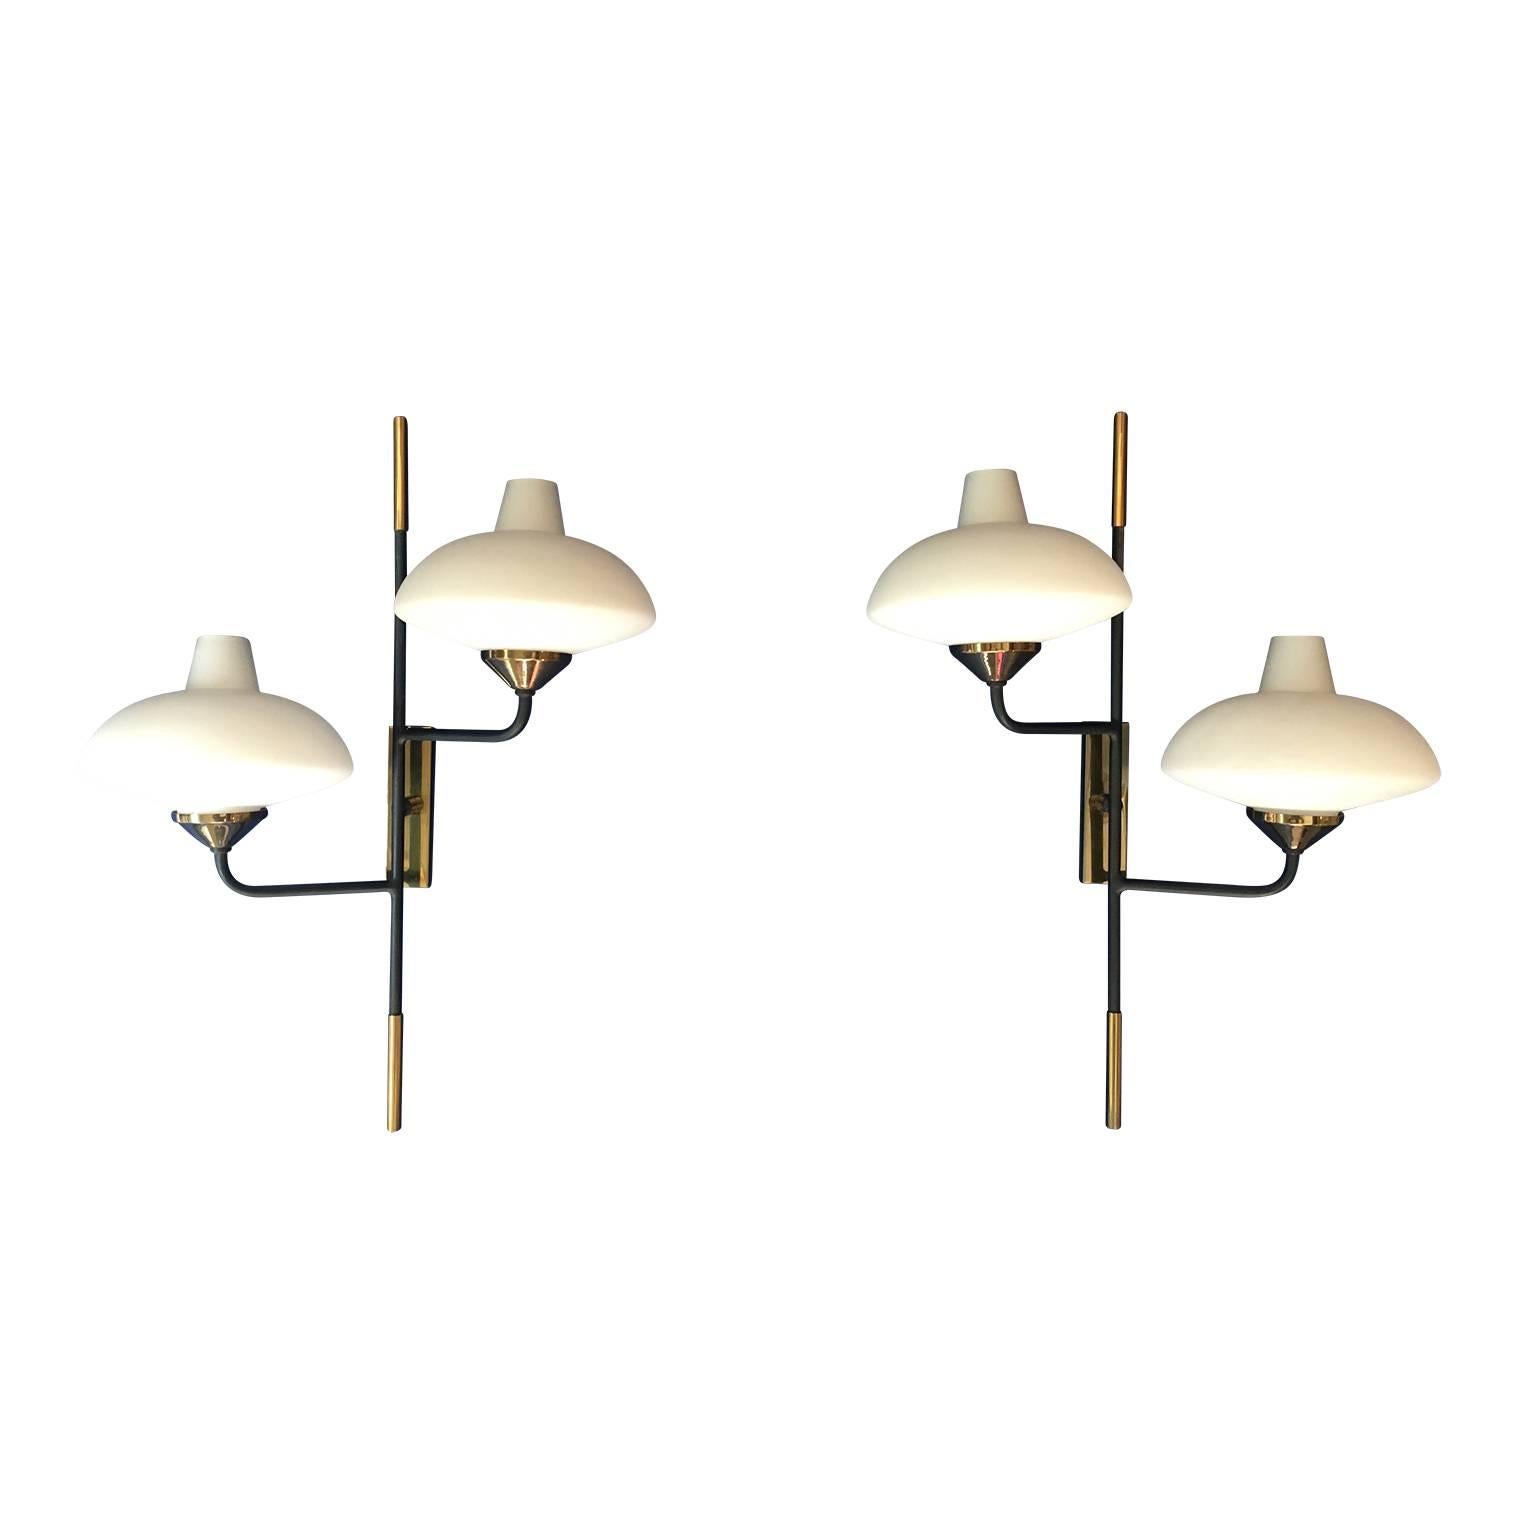 French Maison Arlus 1950s Pair of Brass and Metal Sconces with Opaline Glass